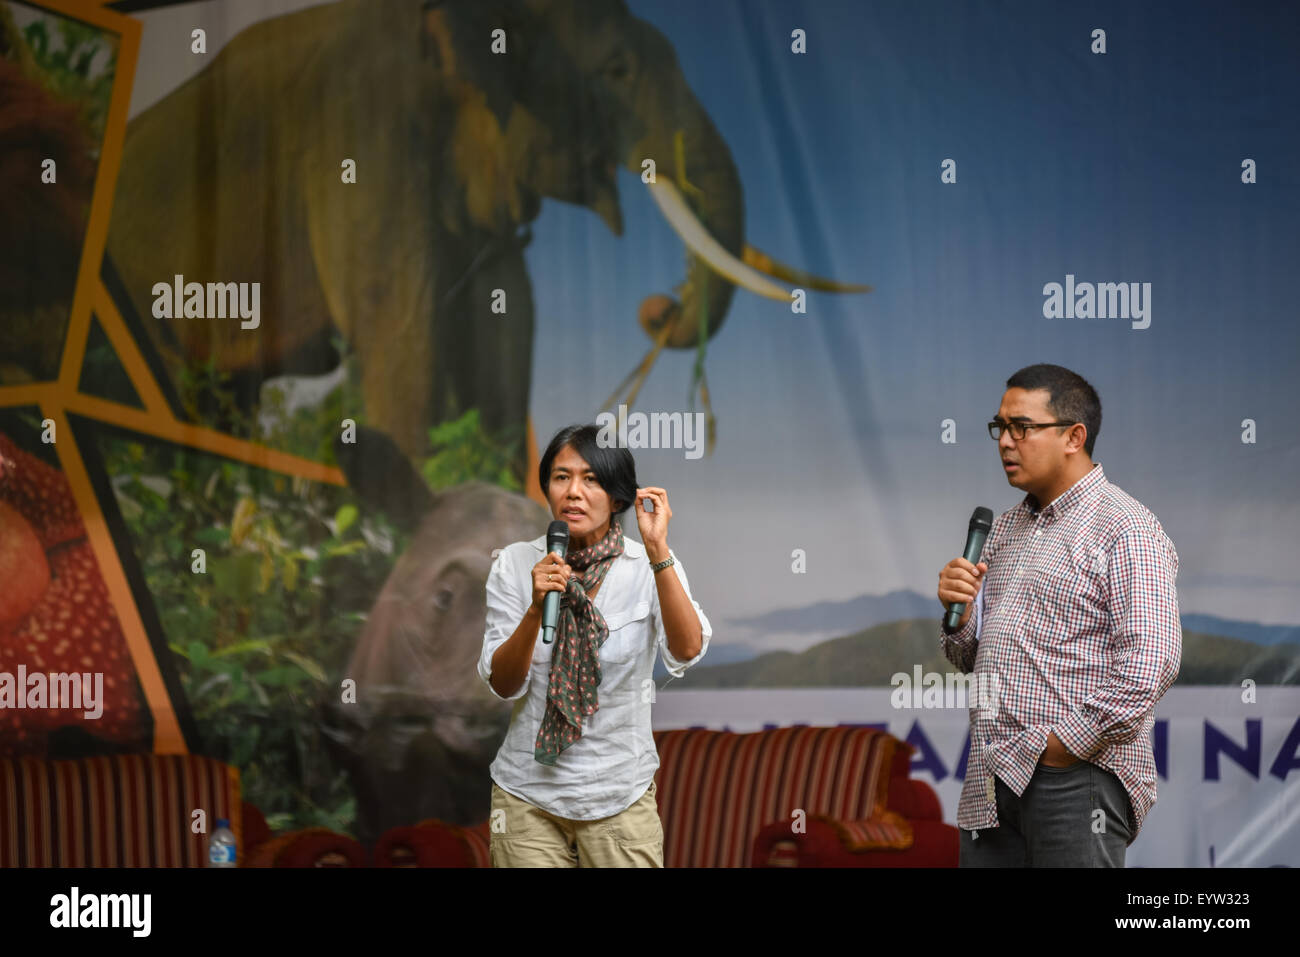 Indonesian broadcast news presenter Desi Anwar and Muhammad Farhan having a talk show on national park and nature conservation in Lampung, Indonesia. Stock Photo